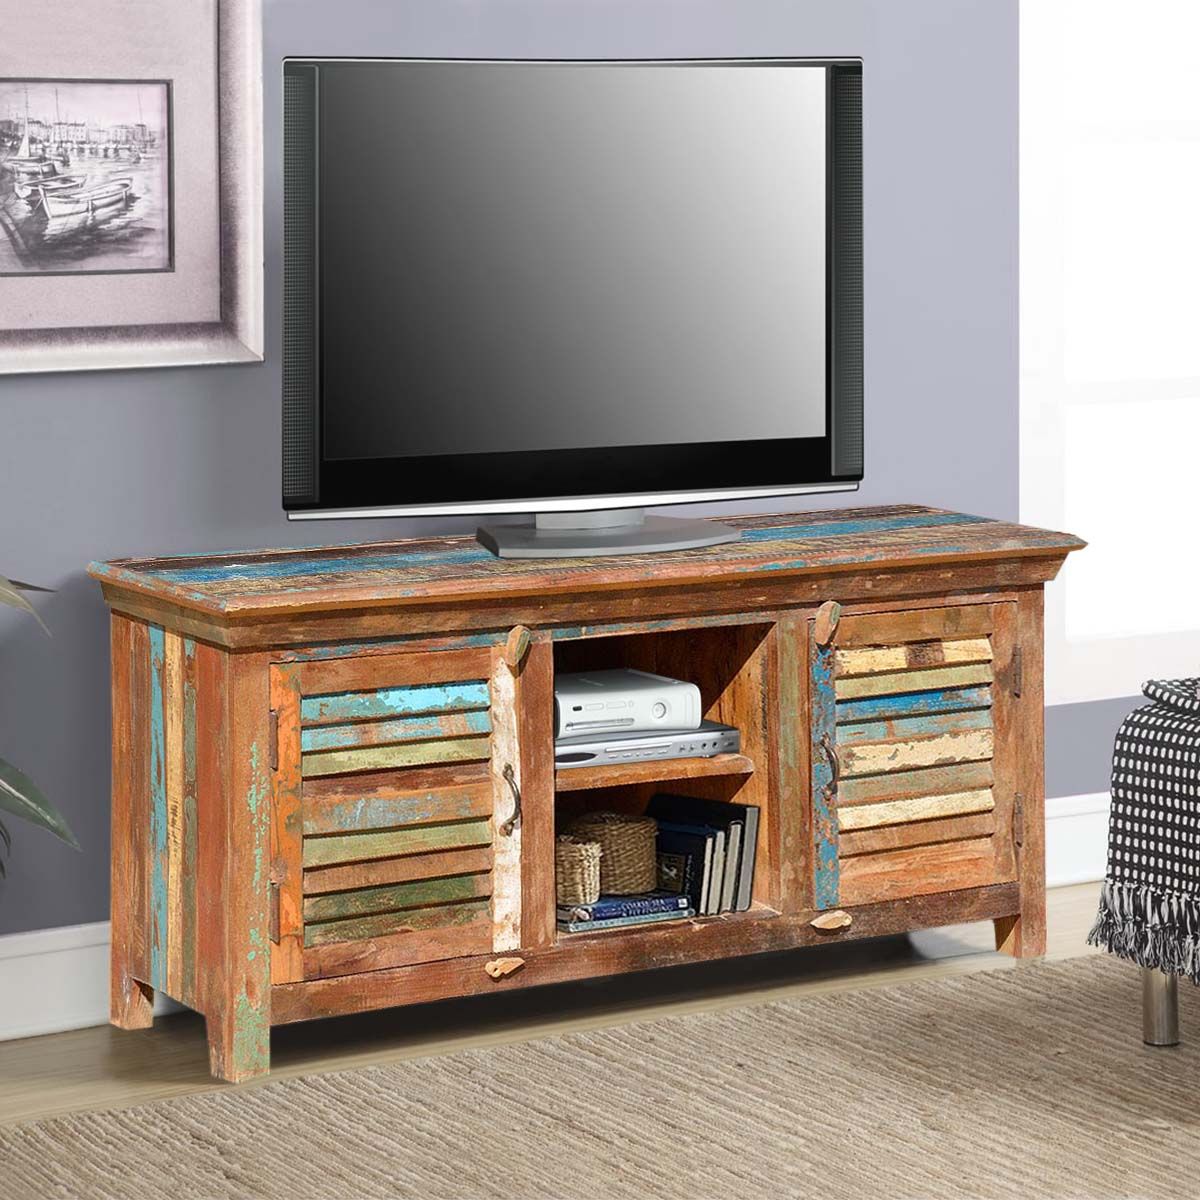 Bertrand Rustic Primitive Reclaimed Wood Tv Stand Media Regarding Tv Stands And Cabinets (View 7 of 15)